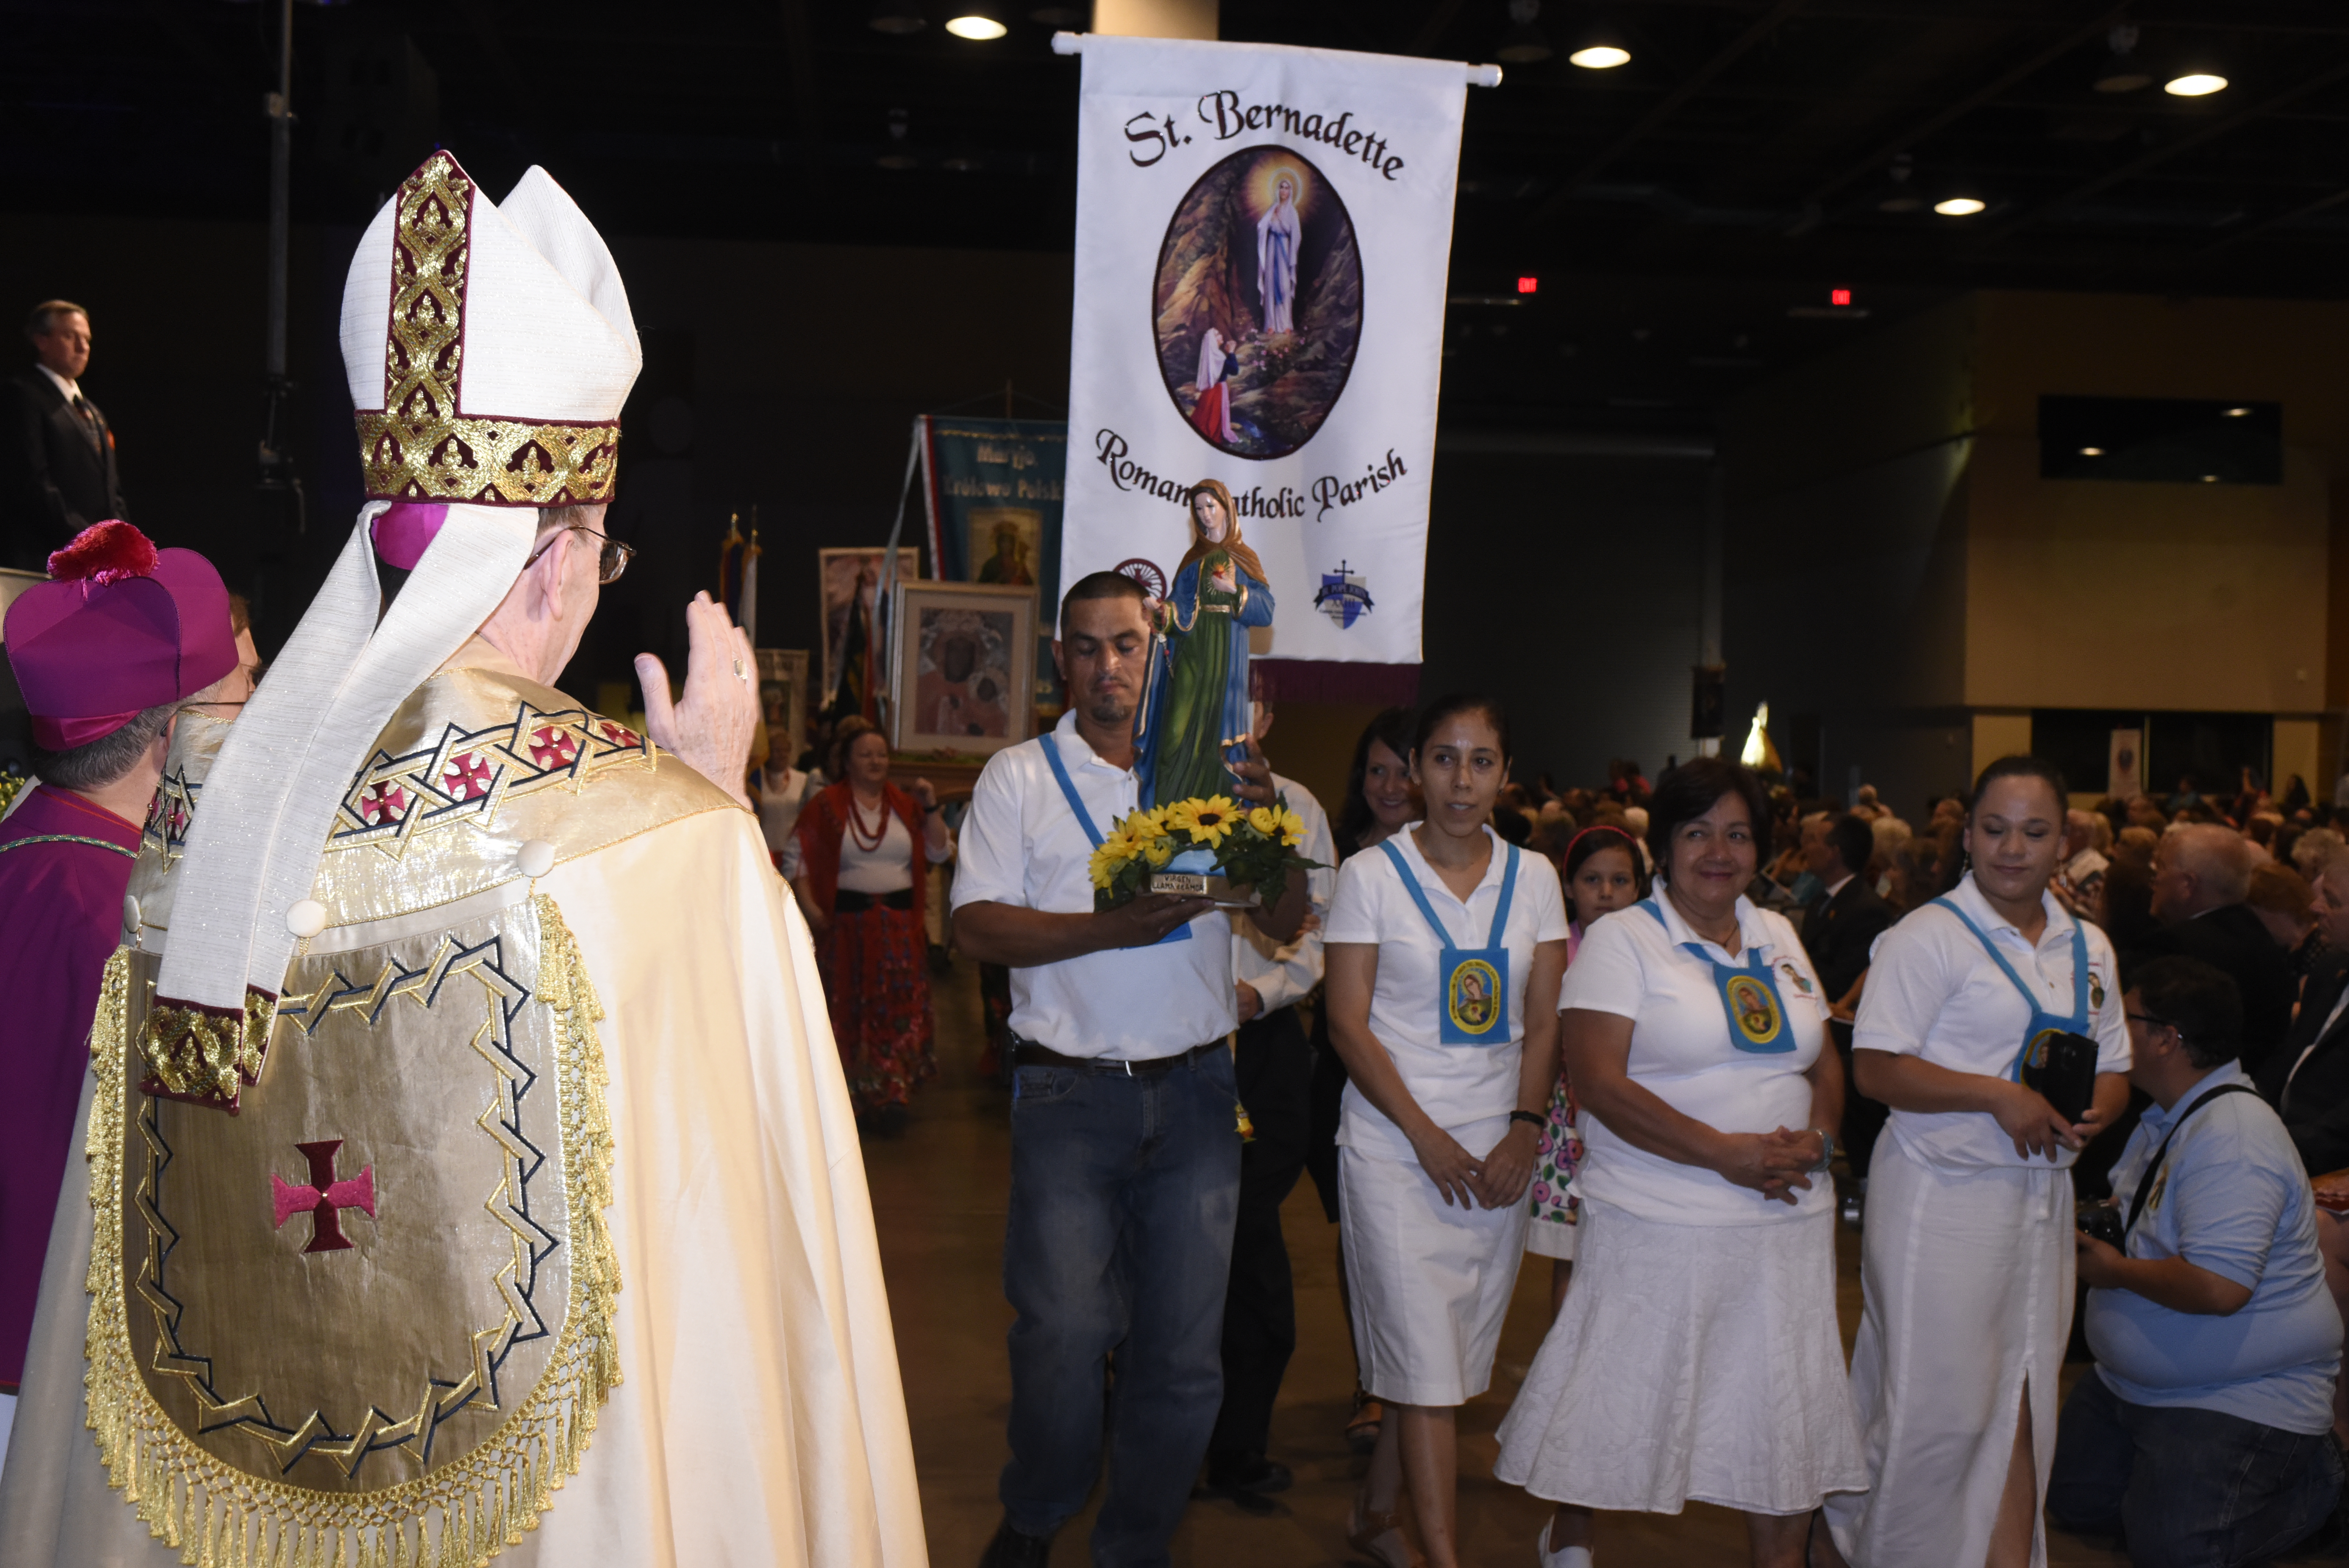 Bishop Thomas J. Olmsted blesses a parish group from St. Bernadette Parish in Scottsdale during the Arizona Rosary Celebration Oct. 23. (Photo courtesy of Catholic Media Ministry)